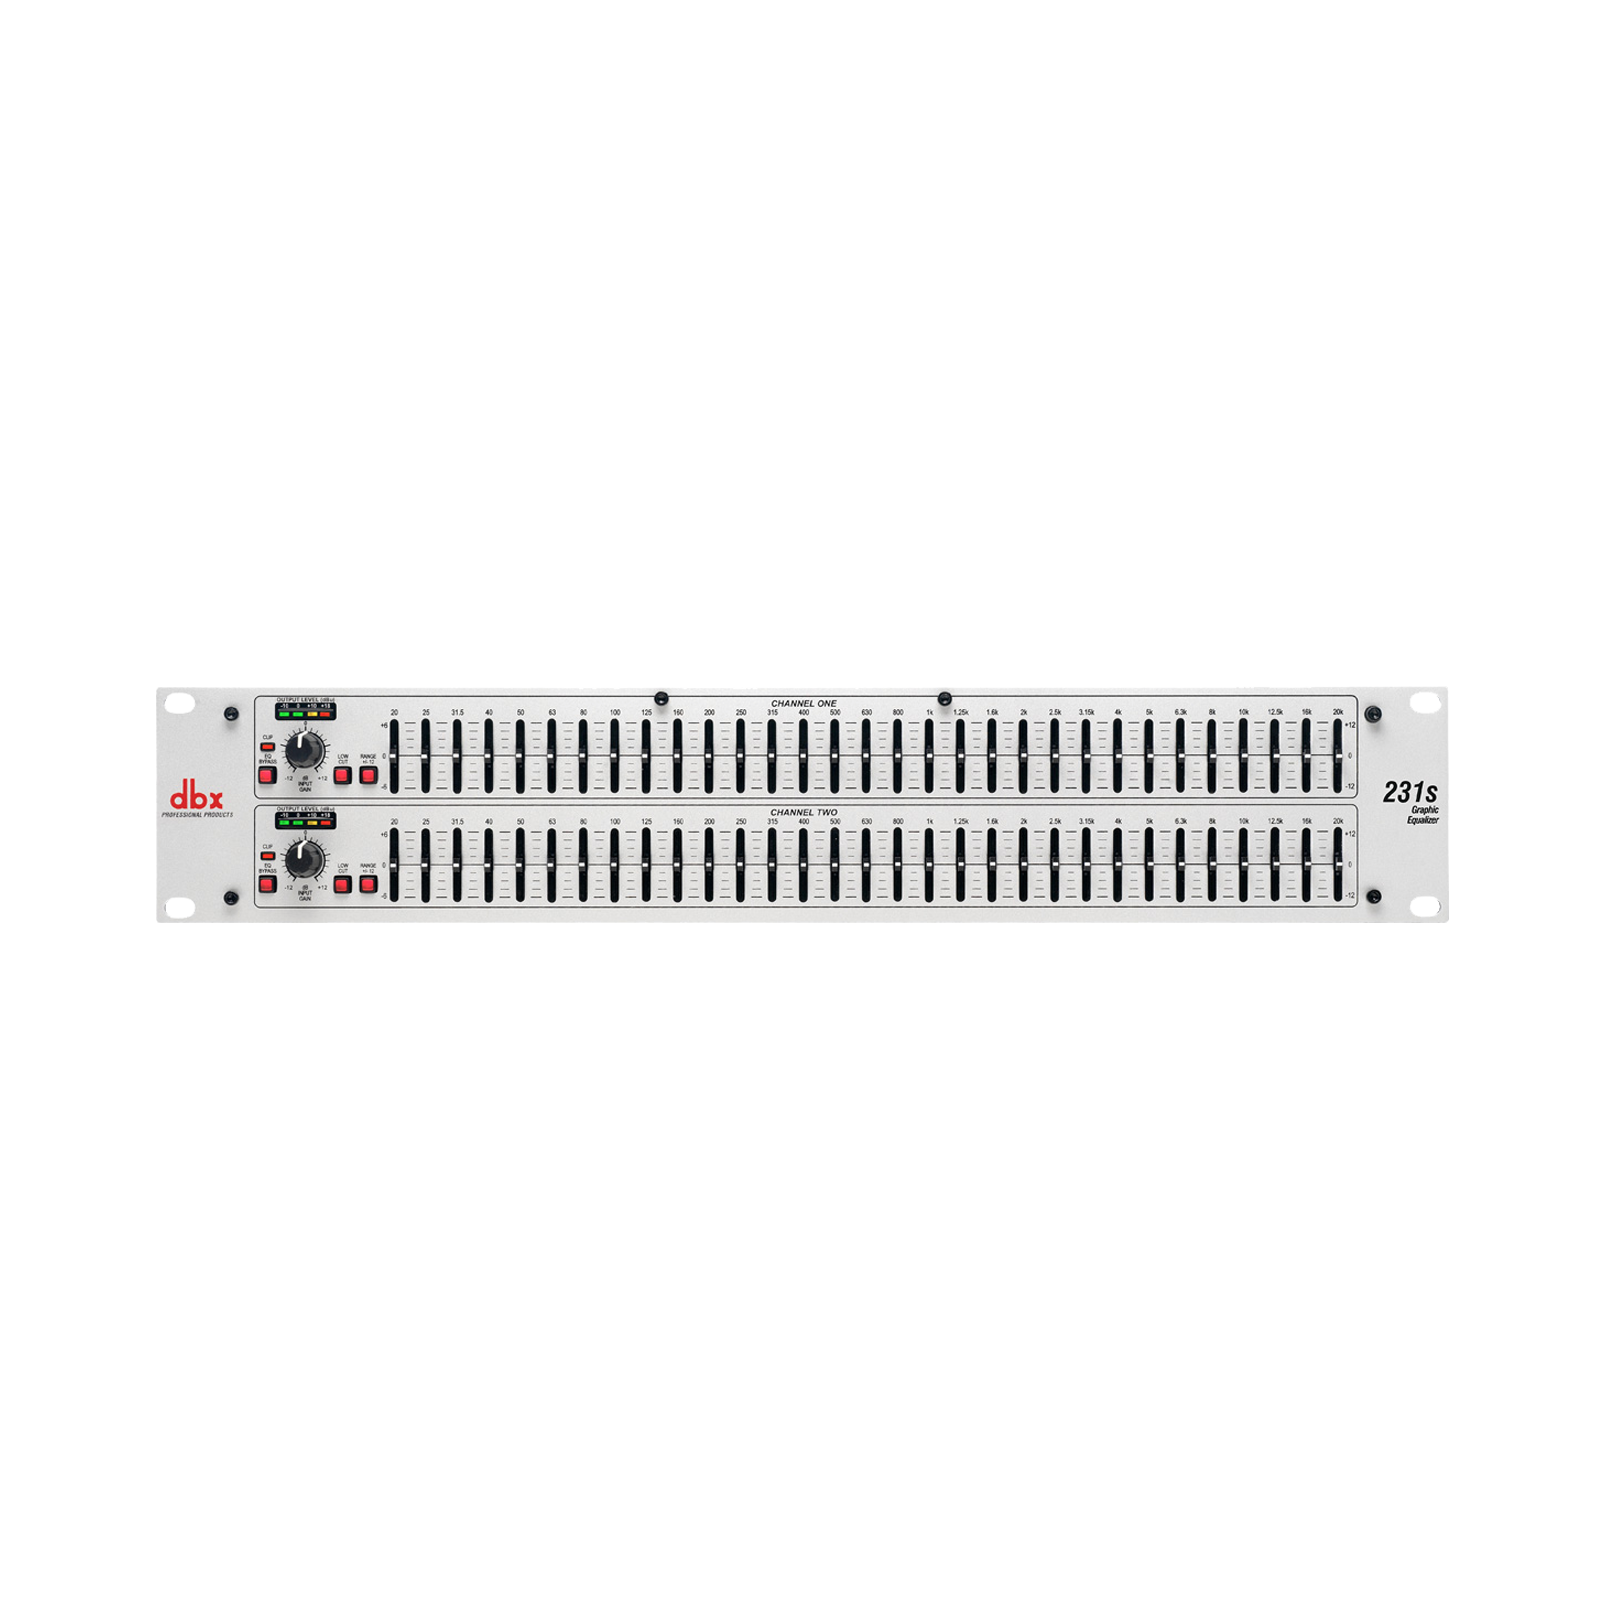 231s - White - Dual channel 31-band equalizer - Hero